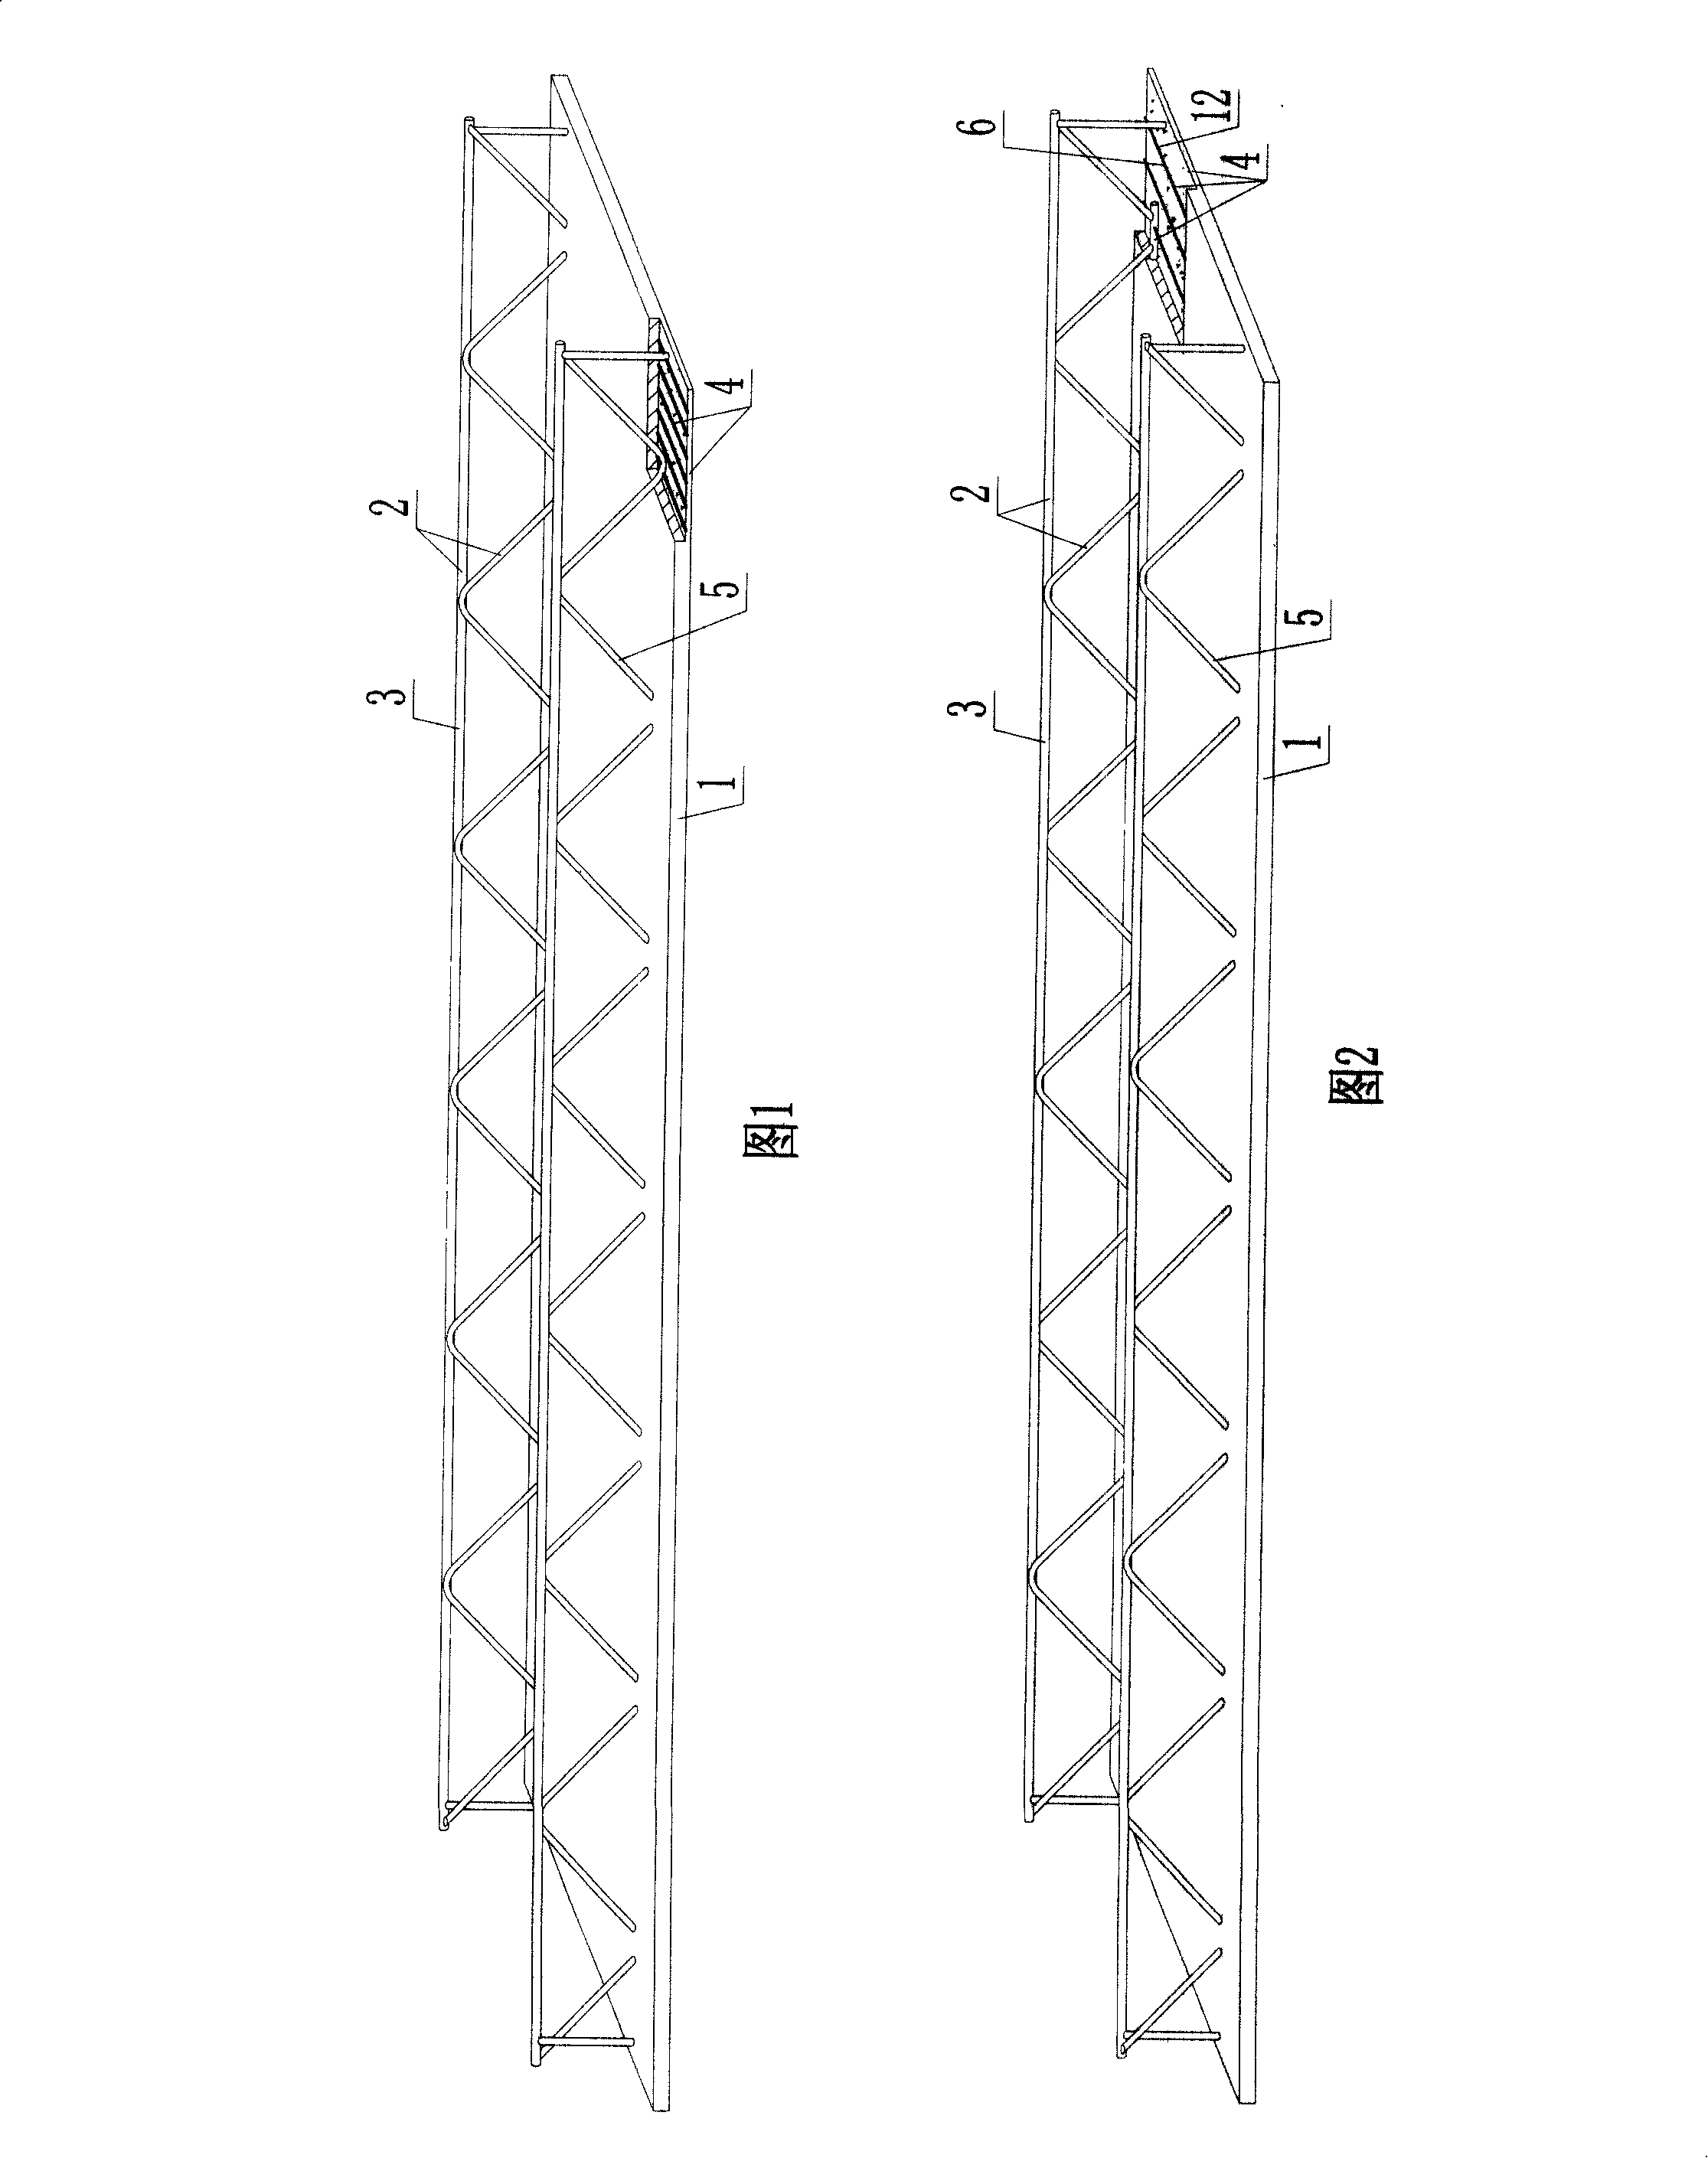 Force-bearing type template component for building lid